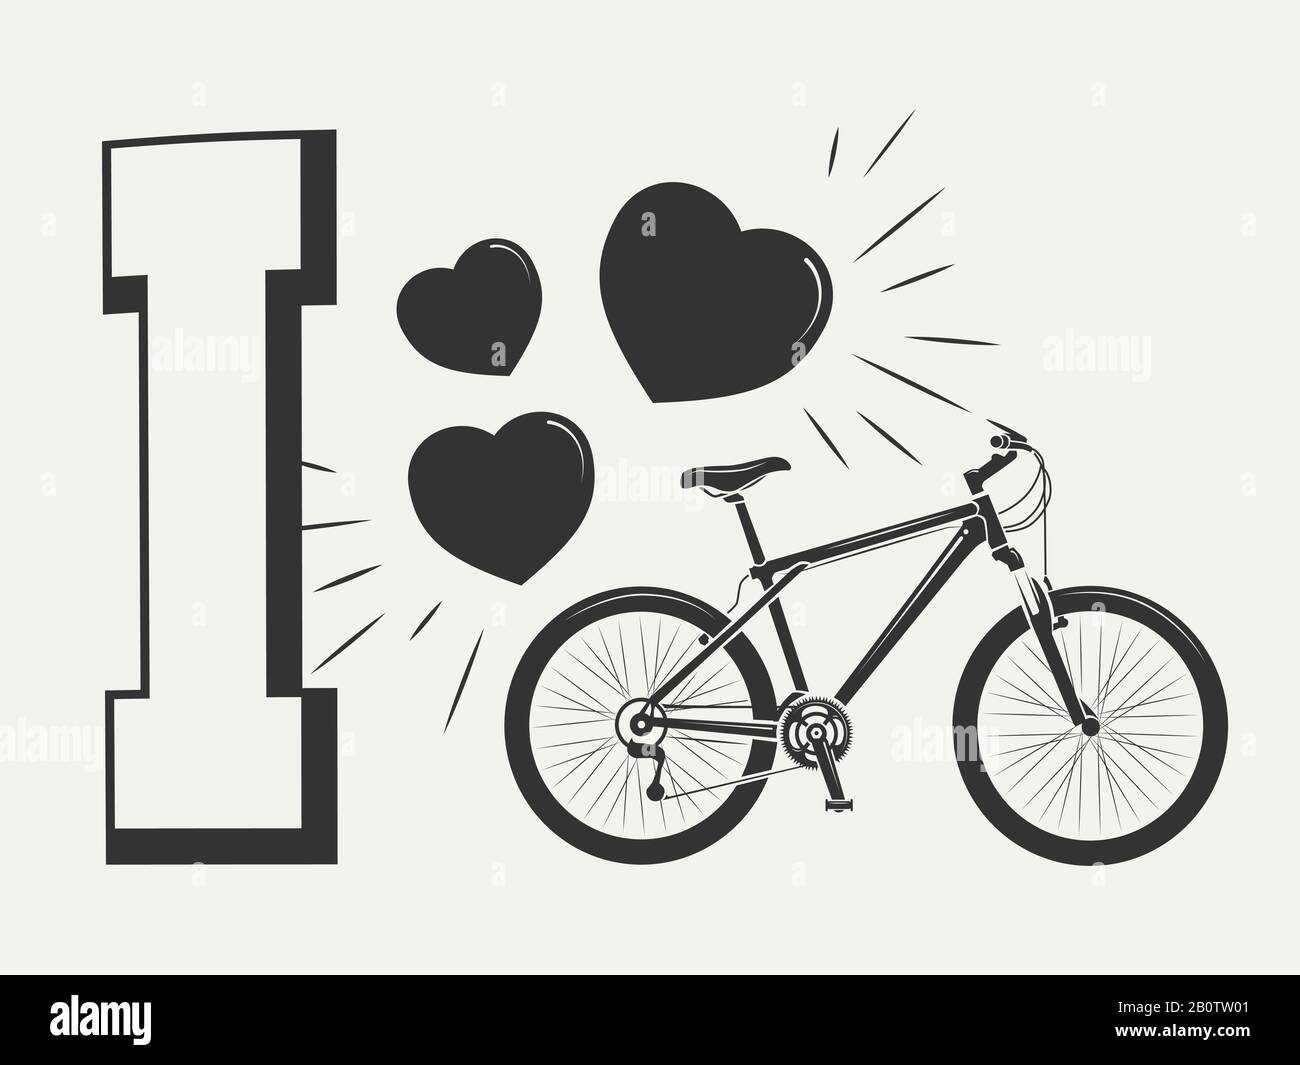 I love bicycle print design - print with bicycle and hearts. Print sport style bike, vector illustration Stock Vector